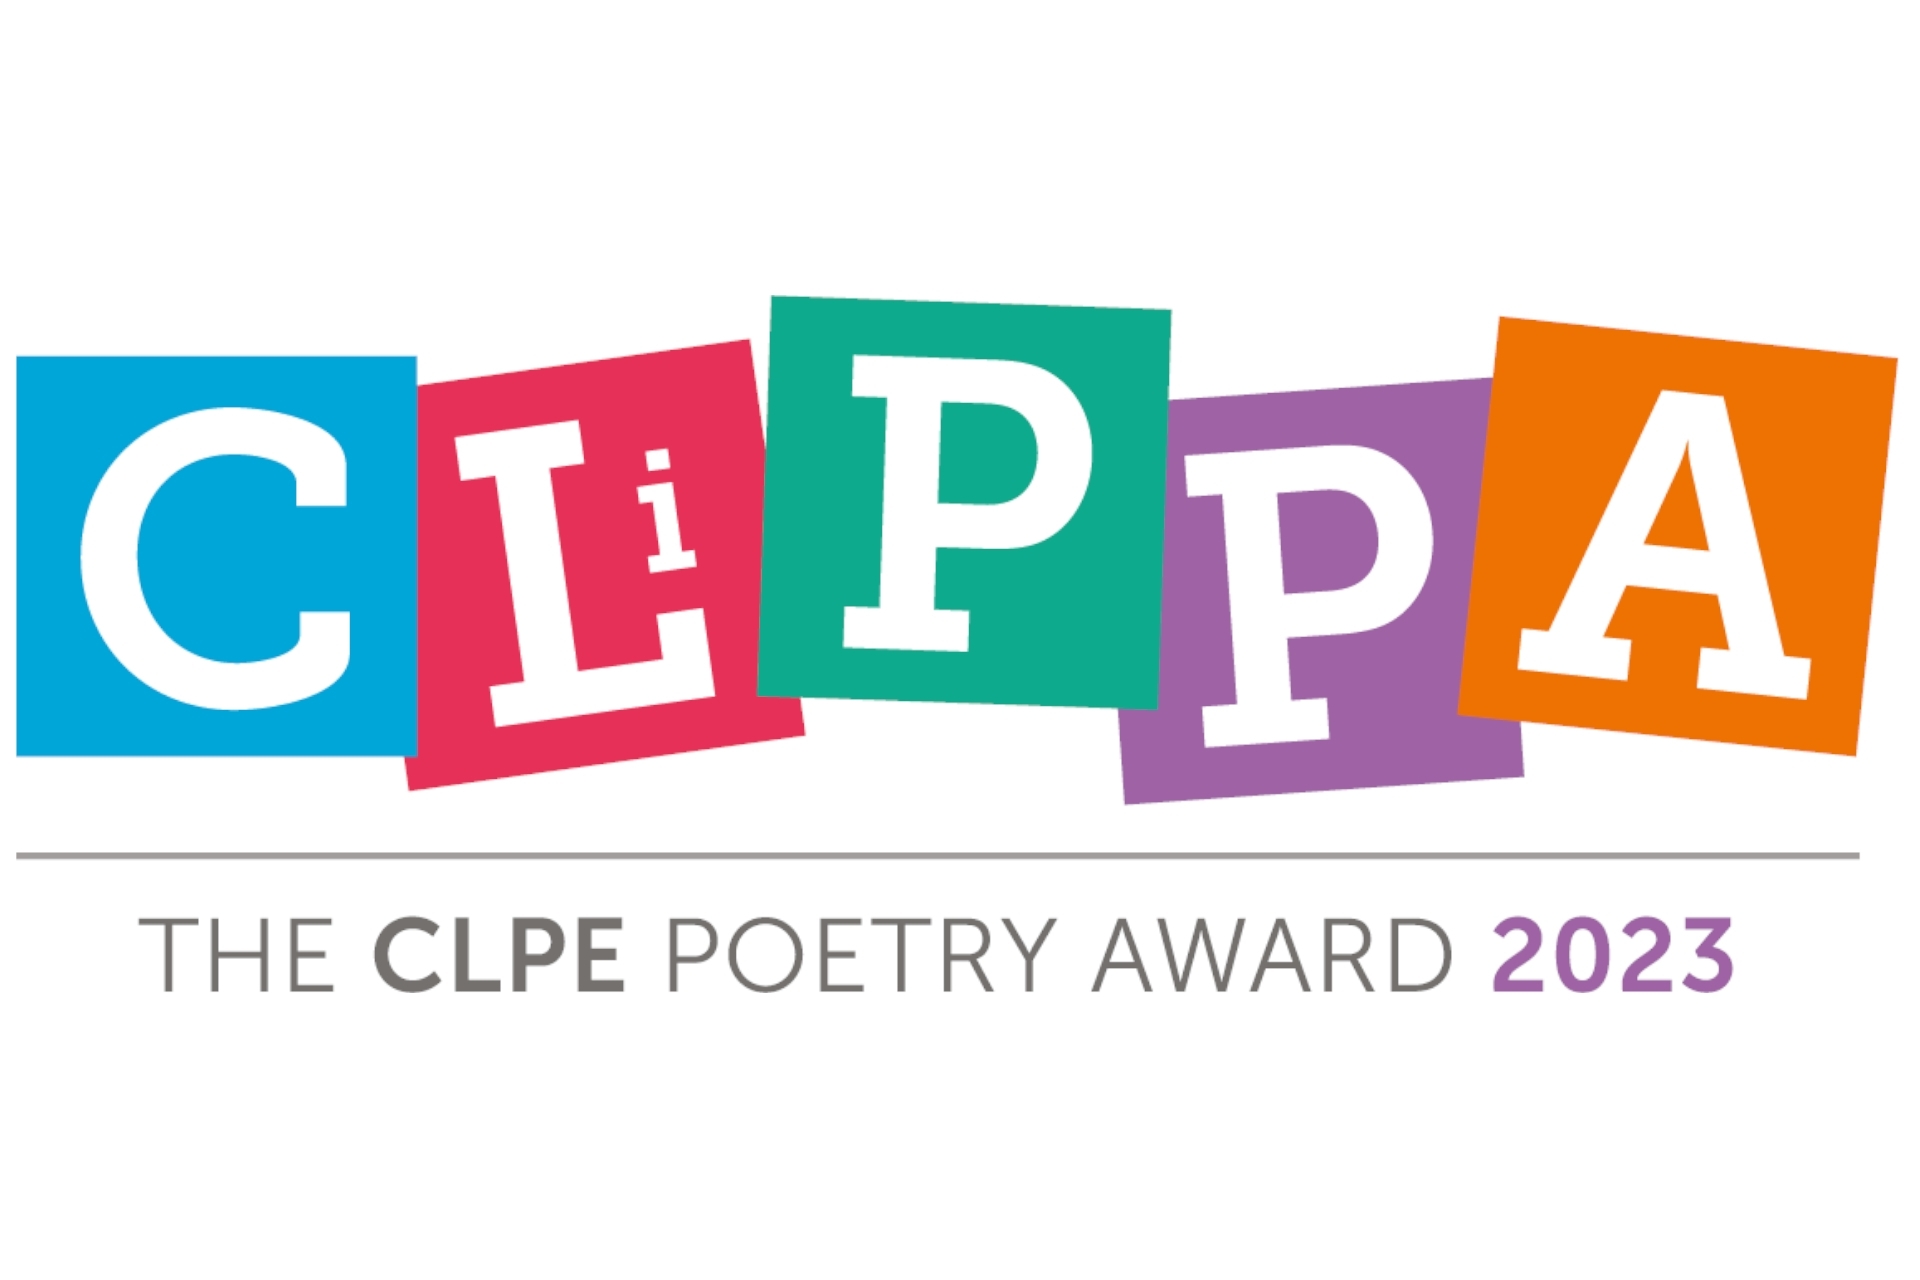 20th anniversary of the CLiPPA, CLPE’s celebration of new poetry for children